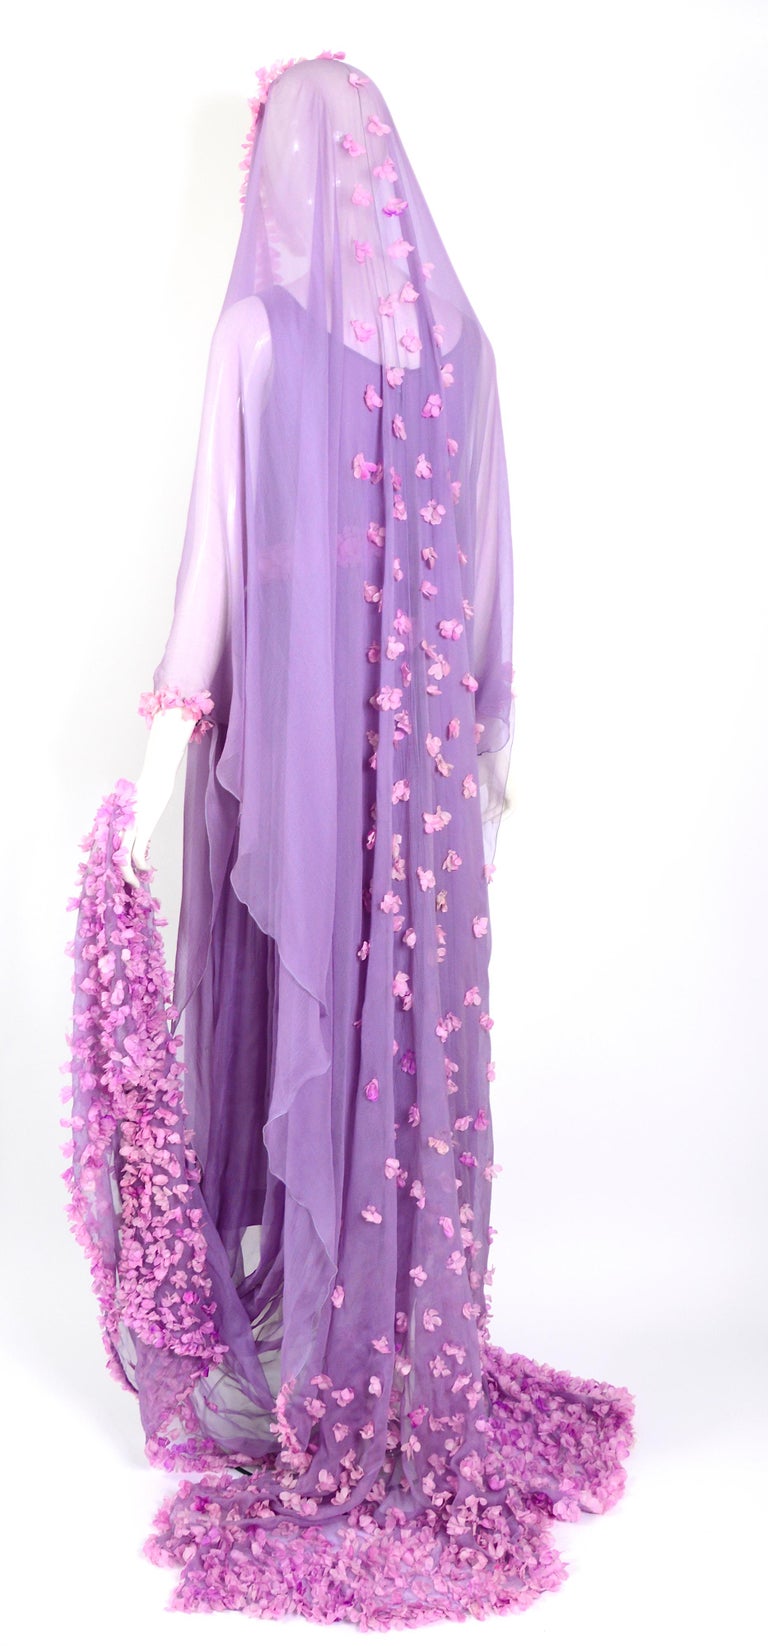 Spectacular vintage 1960s Valentino design lilac silk chiffon kaftan dress. 
This dress is stunning and would make an amazing wedding piece for the bride looking for a non-traditional choice or as an alternative dress in a more extended wedding